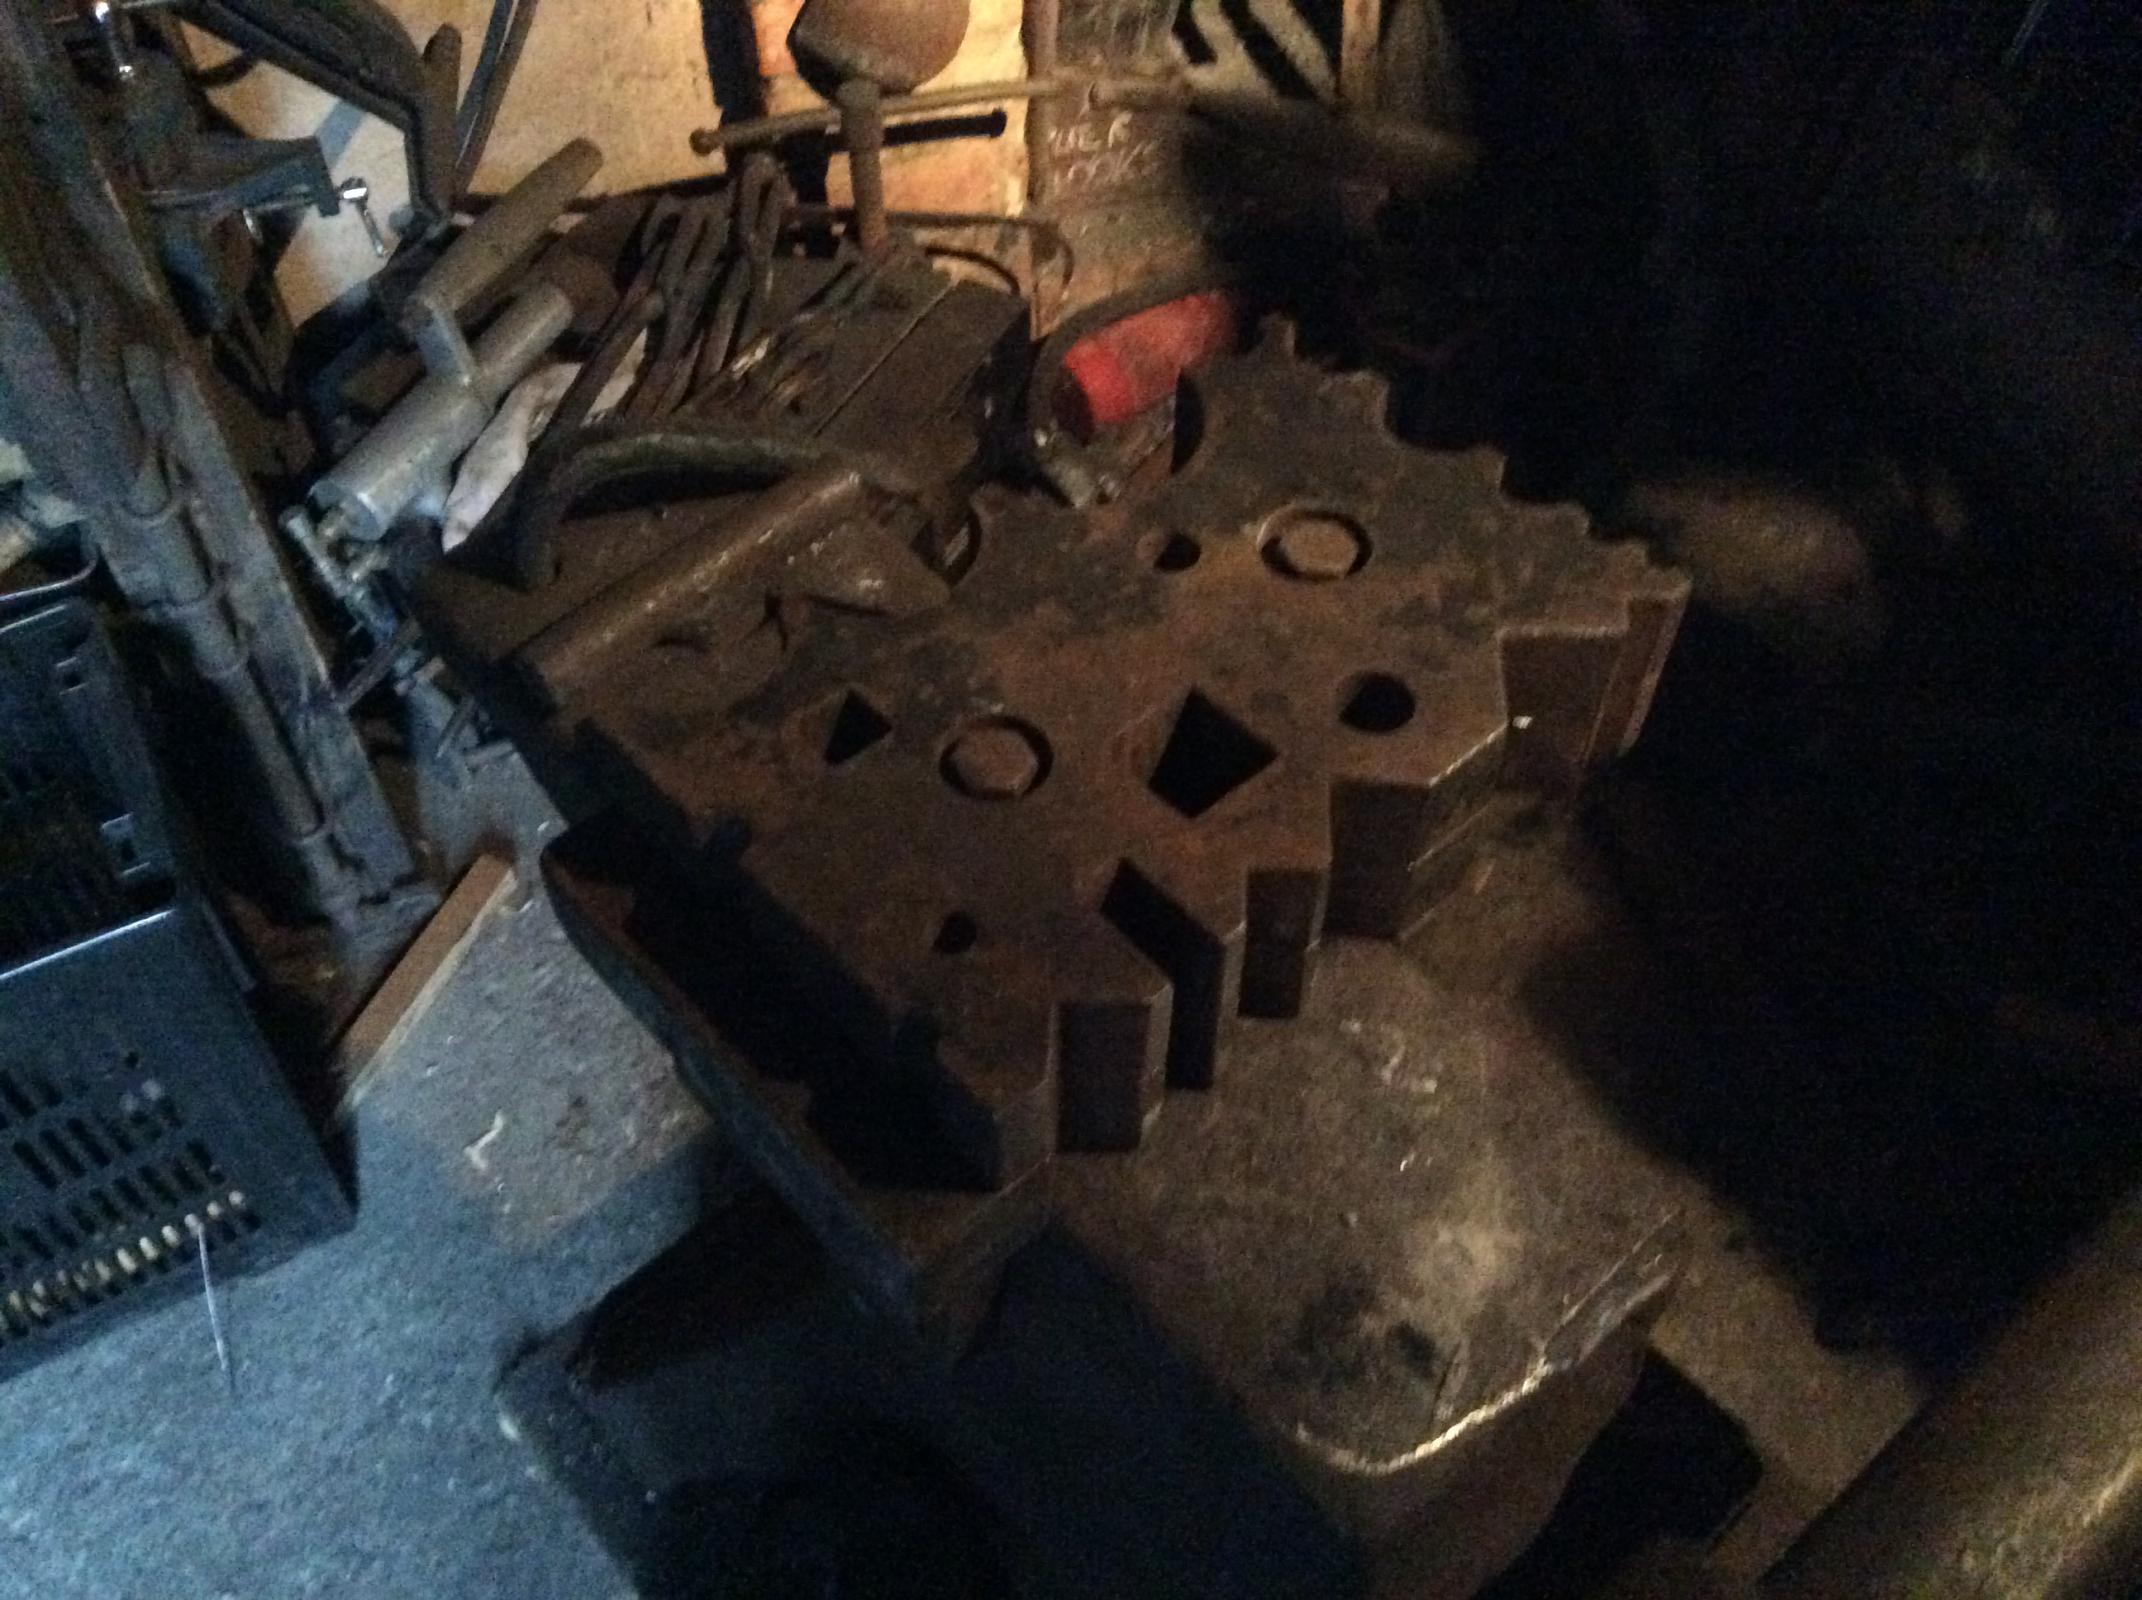 Made an anvil stand for my first anvil - Stands for Anvils, Swage Blocks,  etc - I Forge Iron